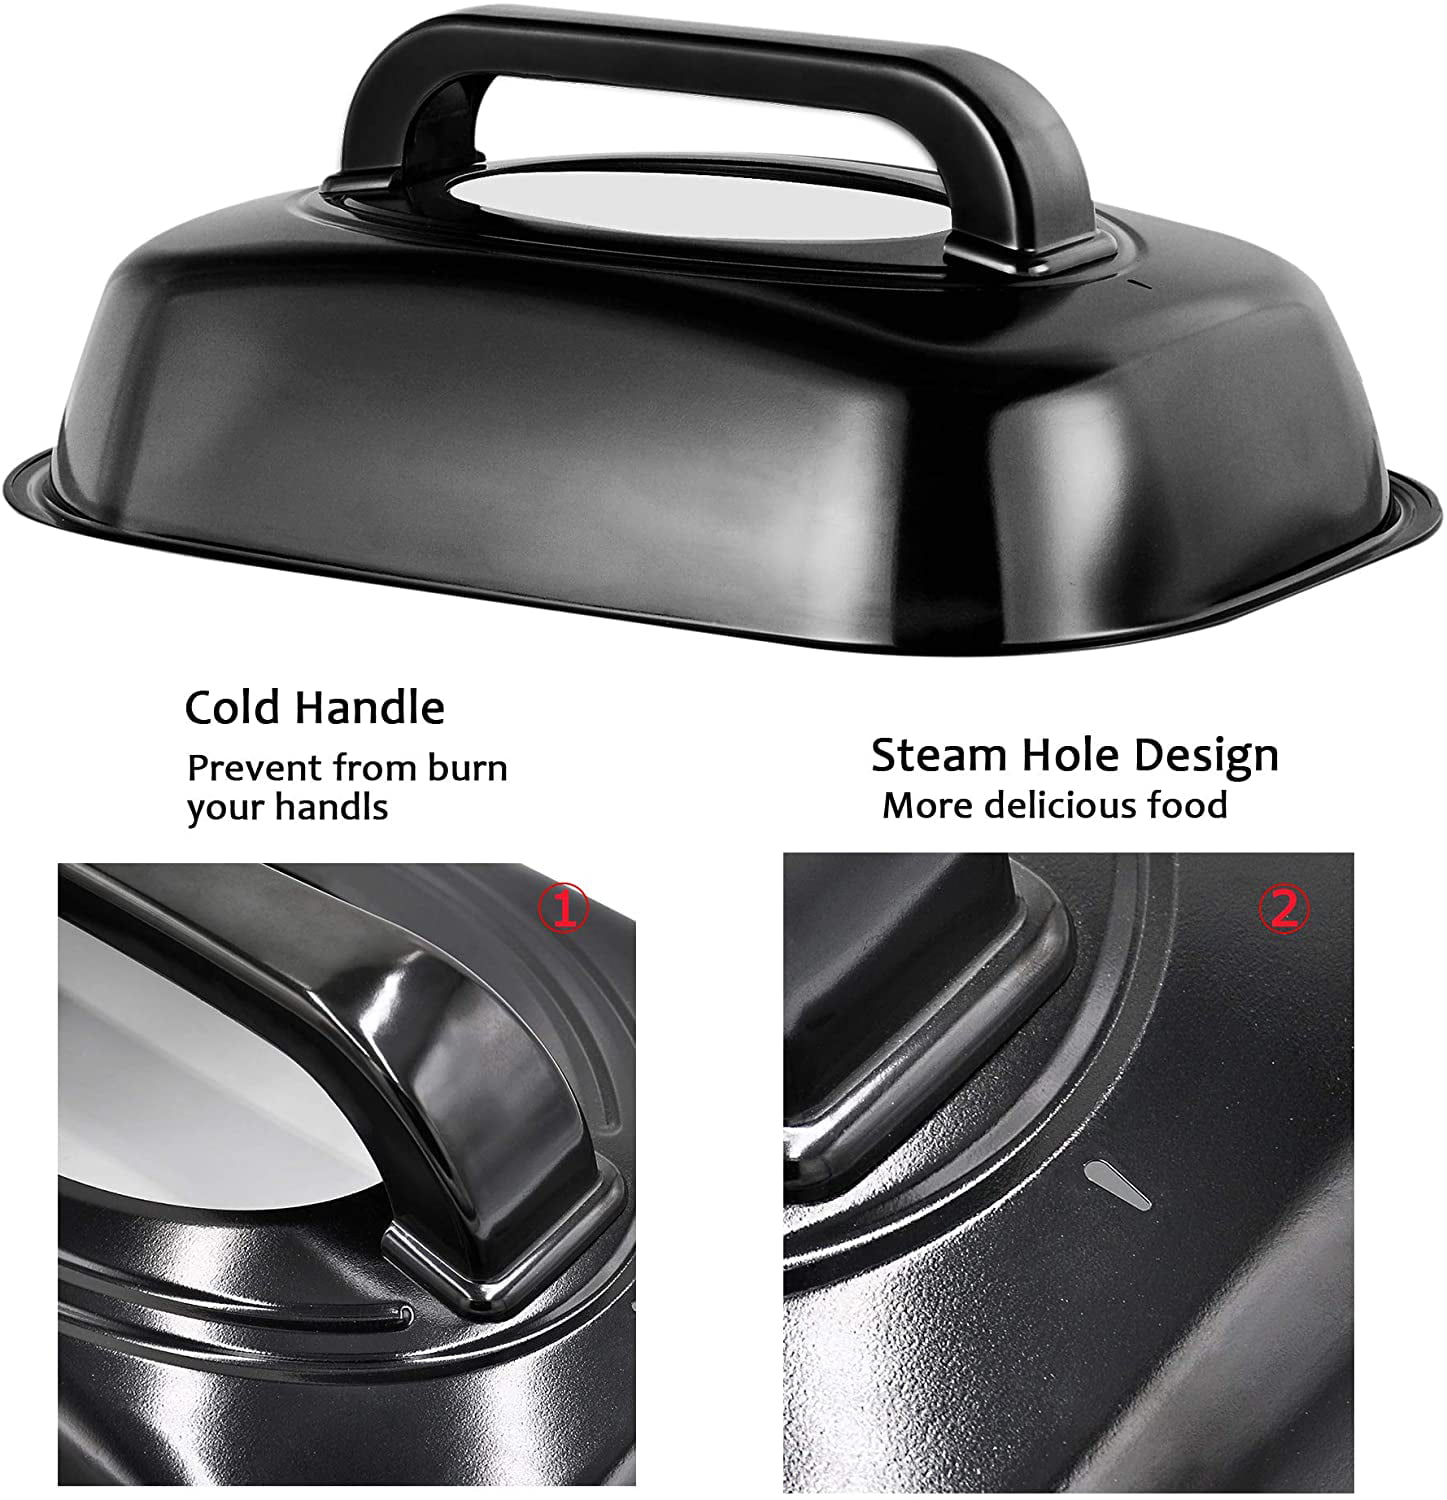 Full-Range Temperature Control Cool-Touch Handles Roaster Oven Silver Body Turkey Roaster Electric Removable Pan Black Lid Electric Roaster Selfbasting Lid 22 Quart Electric Roaster Oven 